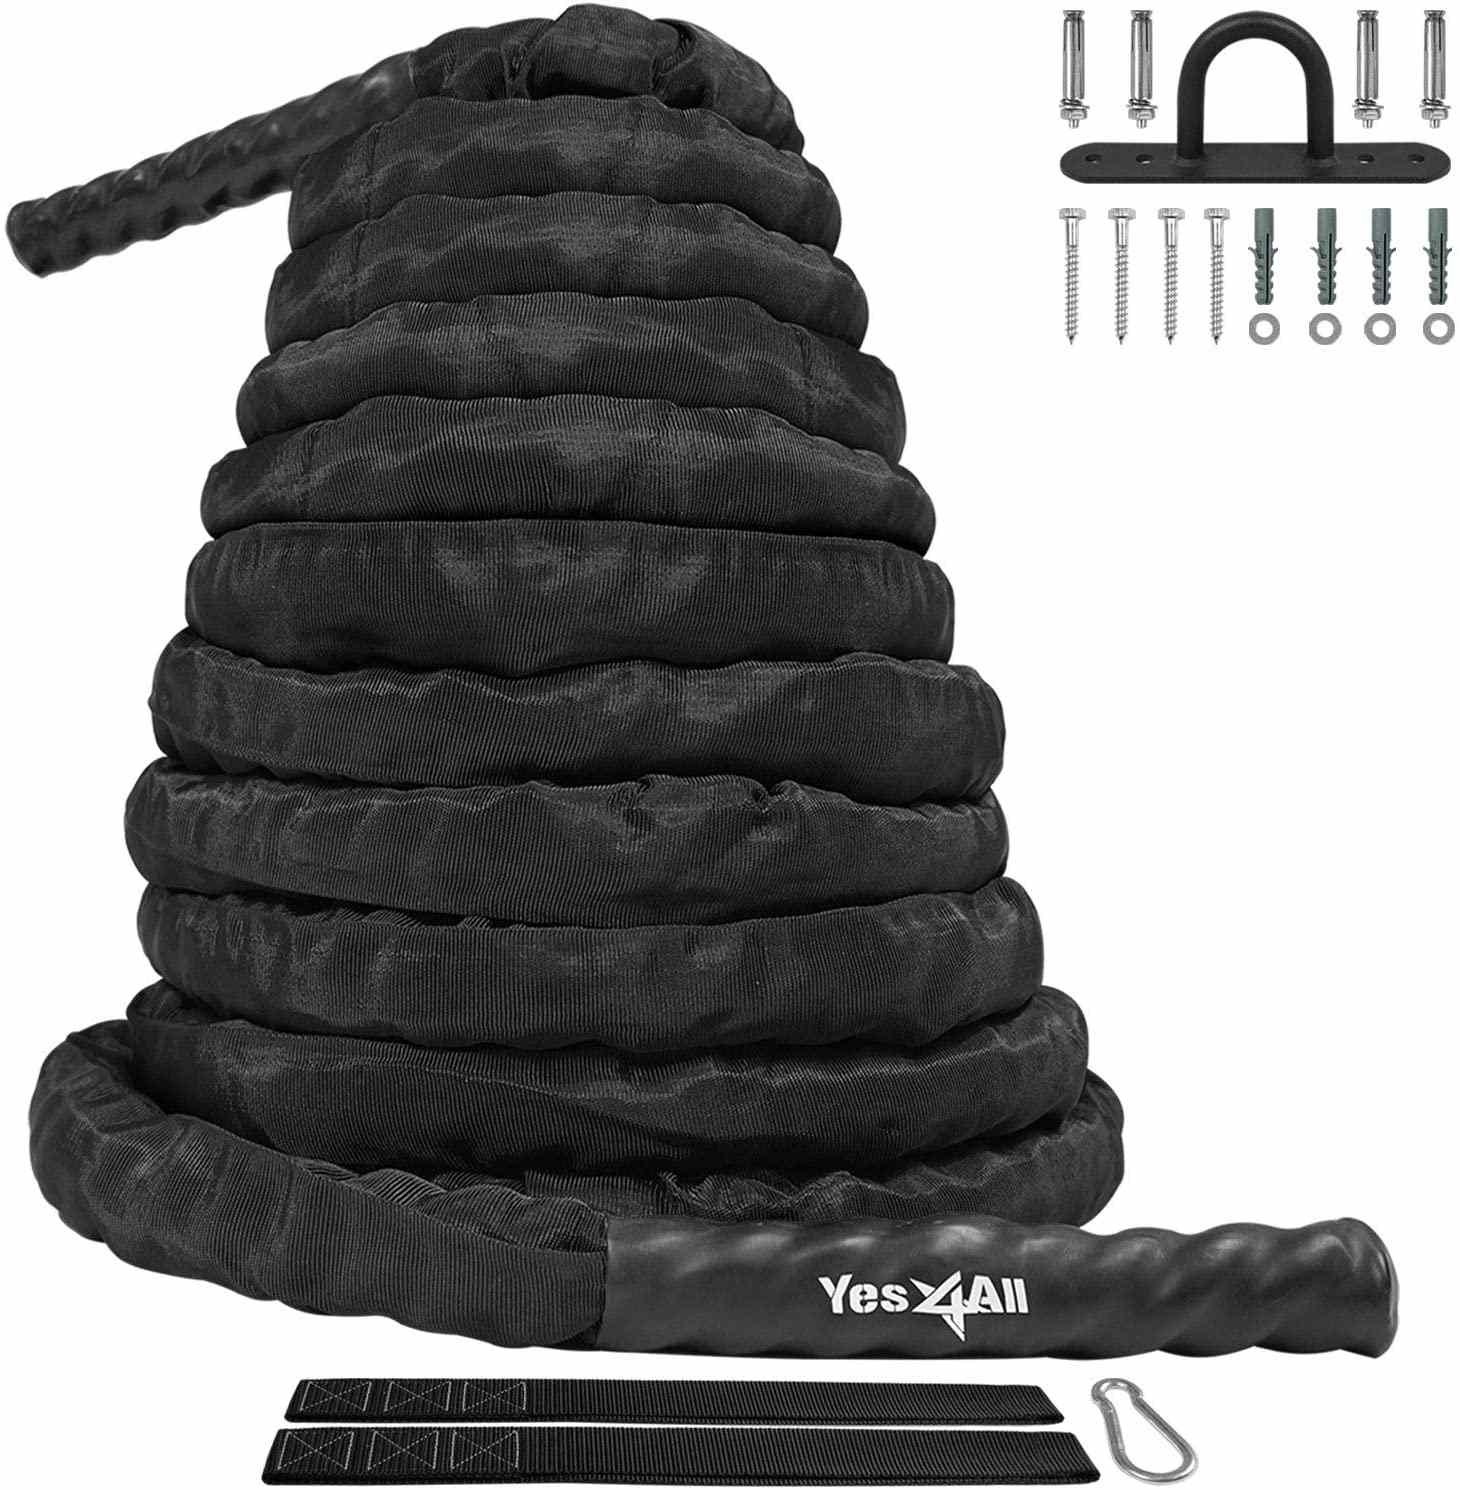 Yes4All Battle Exercise Training Rope met beschermhoes